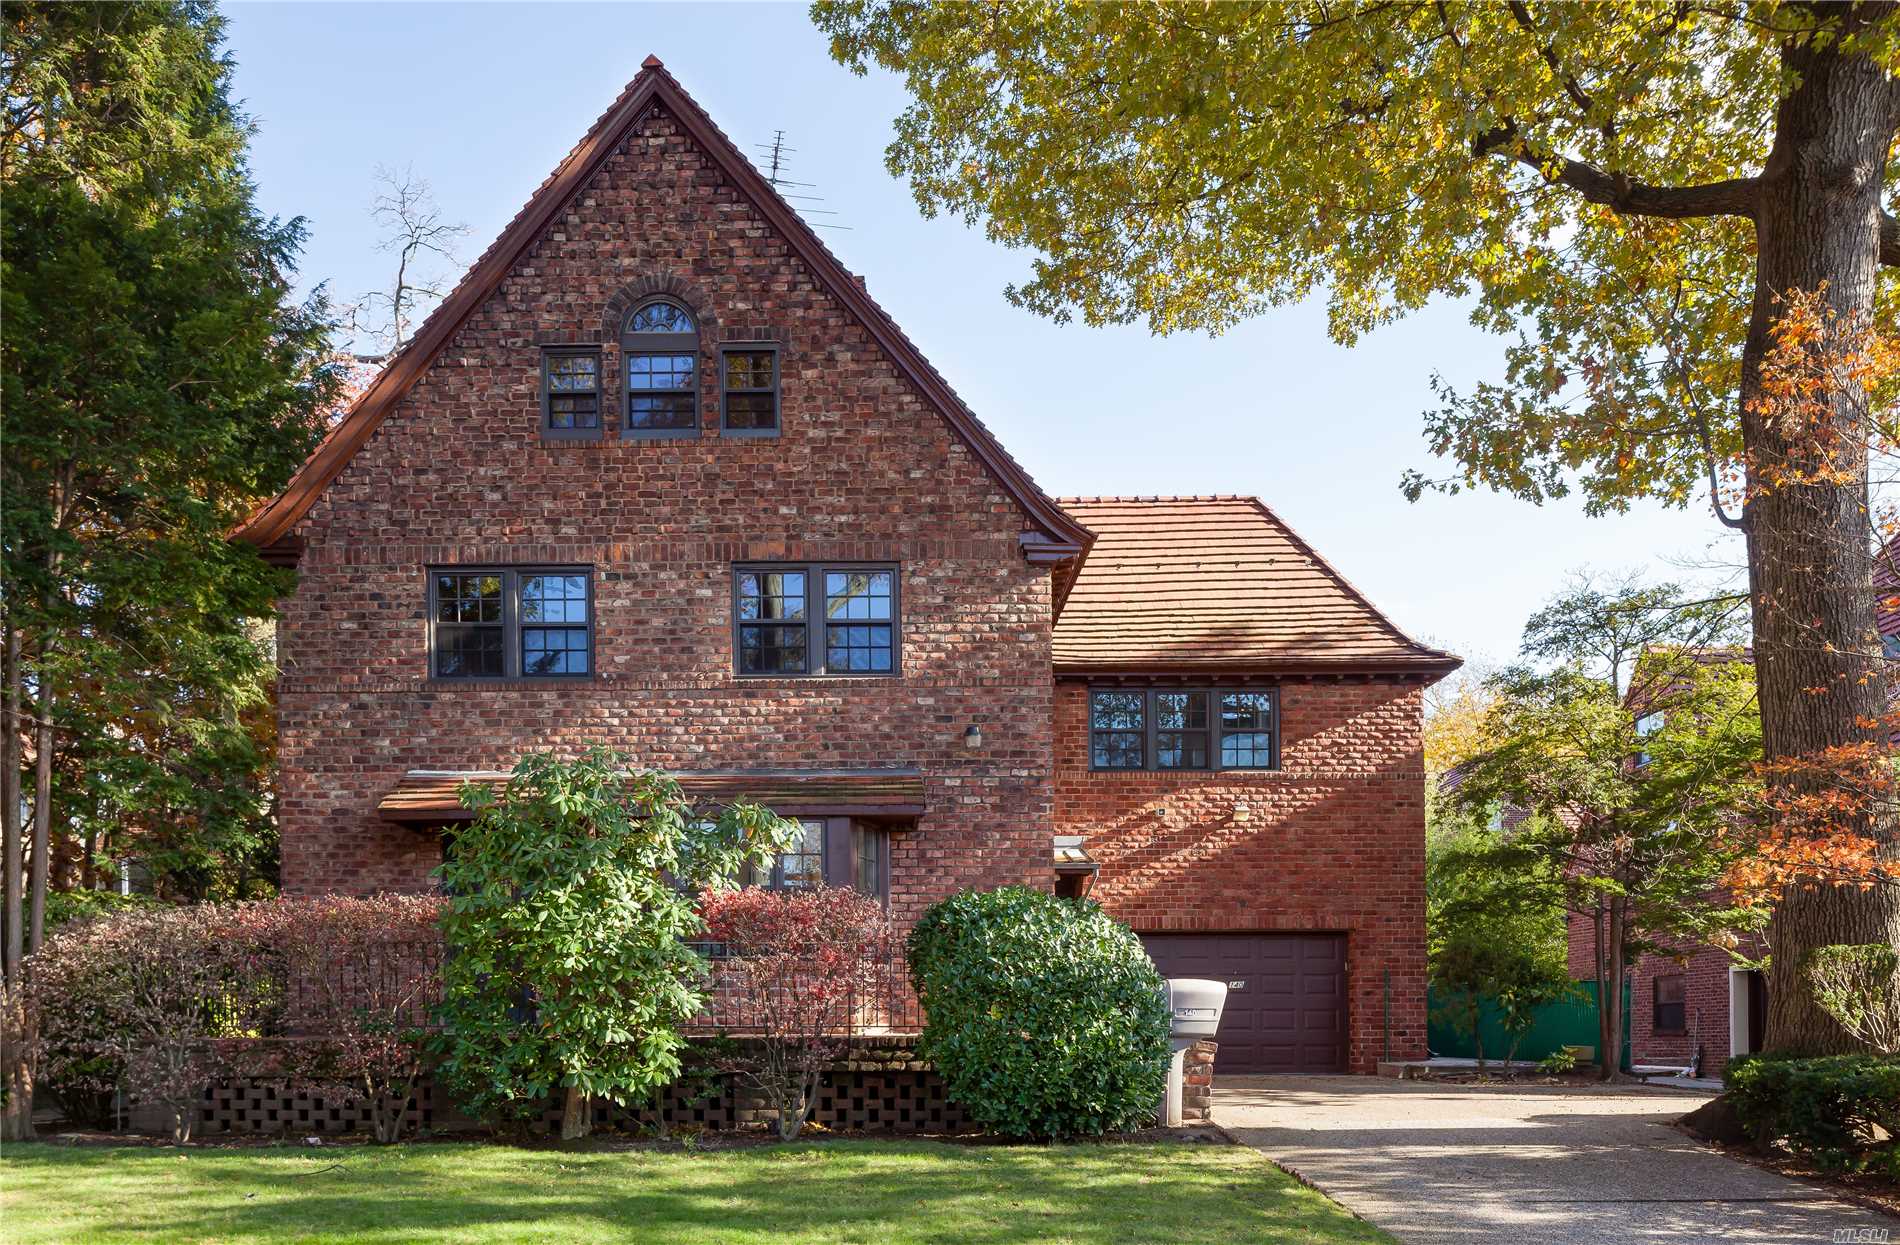 This Grand Fully Renovated Tapestry Brick Colonial Sits On A Private Over-Sized (Approx. 8500 Sf) Lot. Impressive Lr W/Wood-Burning Fpl, Formal Dining Rm, Renovated Kitchen W/Adjoining Breakfast Rm, 5 Br&rsquo;s, 6 Baths, Including A Luxe Master Br Suite With Fpl, Bath And Private Patio, Plus Add&rsquo;l 4 Br&rsquo;s With A Private Guest Or Office Wing, 2nd Back Staircase, Elevator & Sauna.